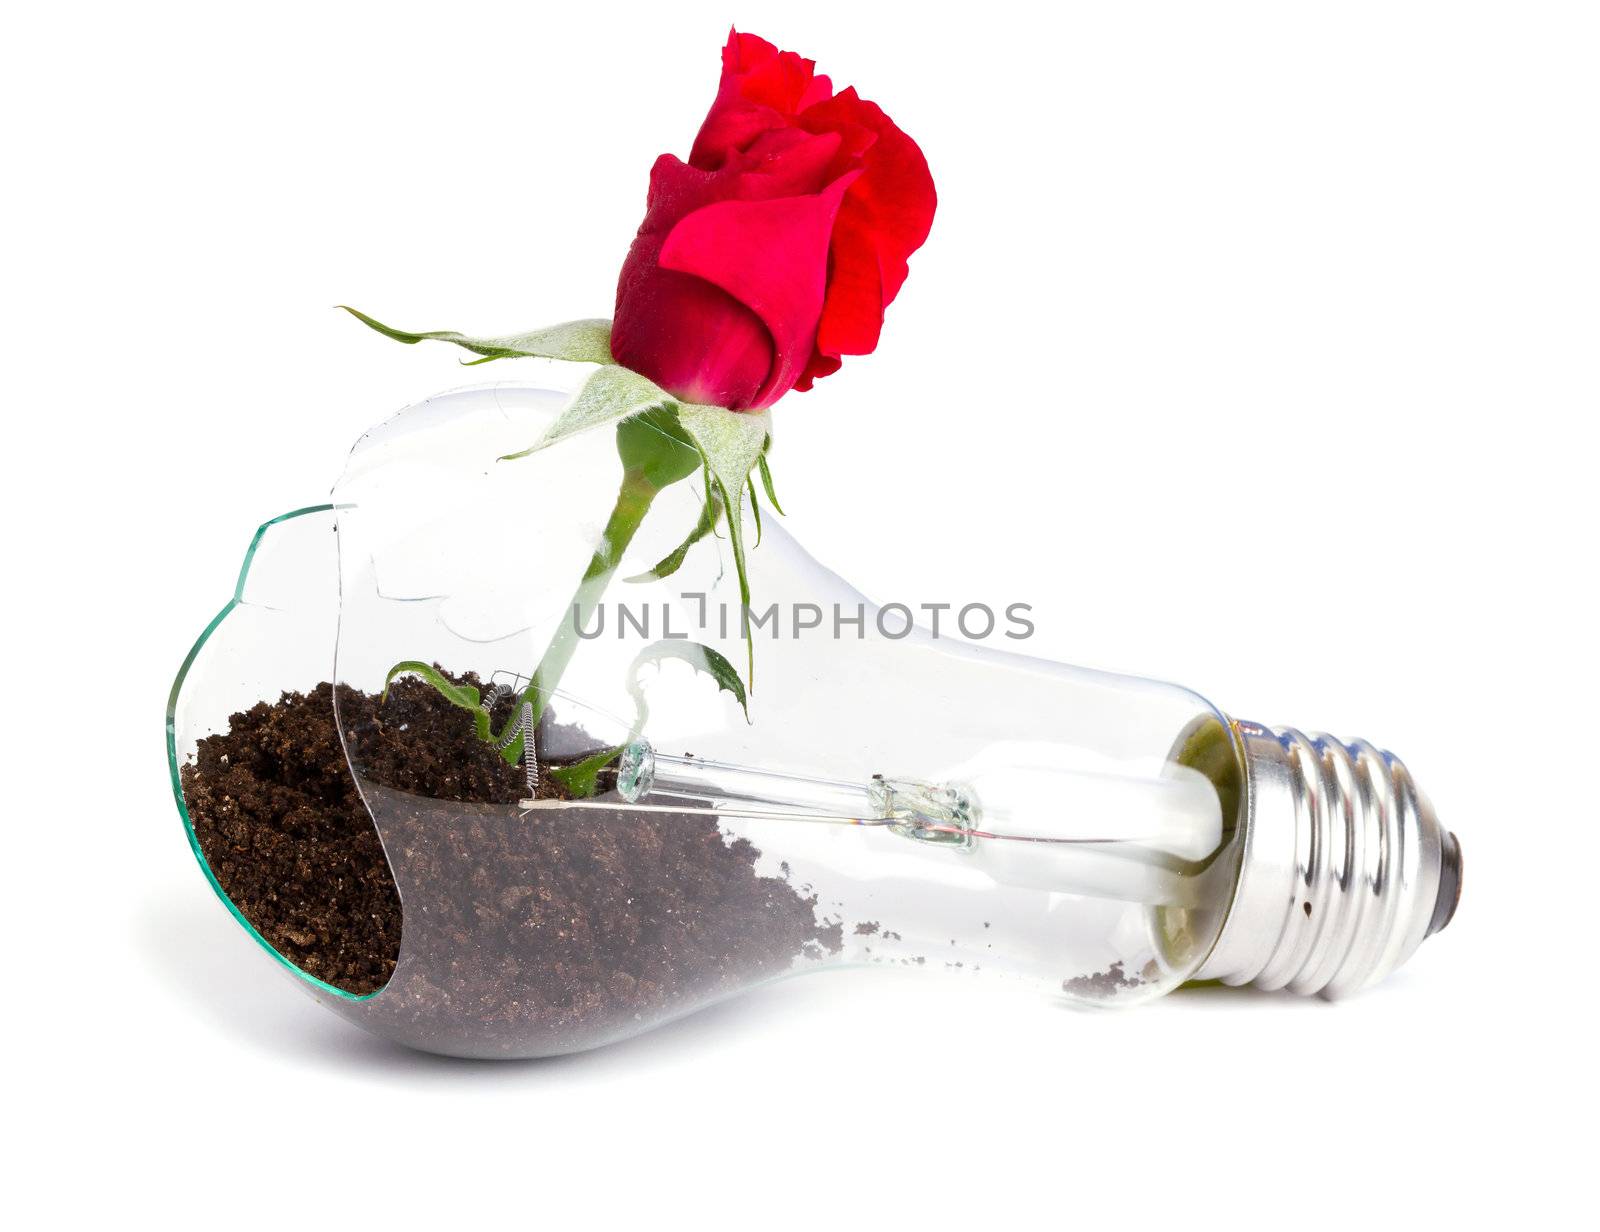 lightbulb with plant growing inside